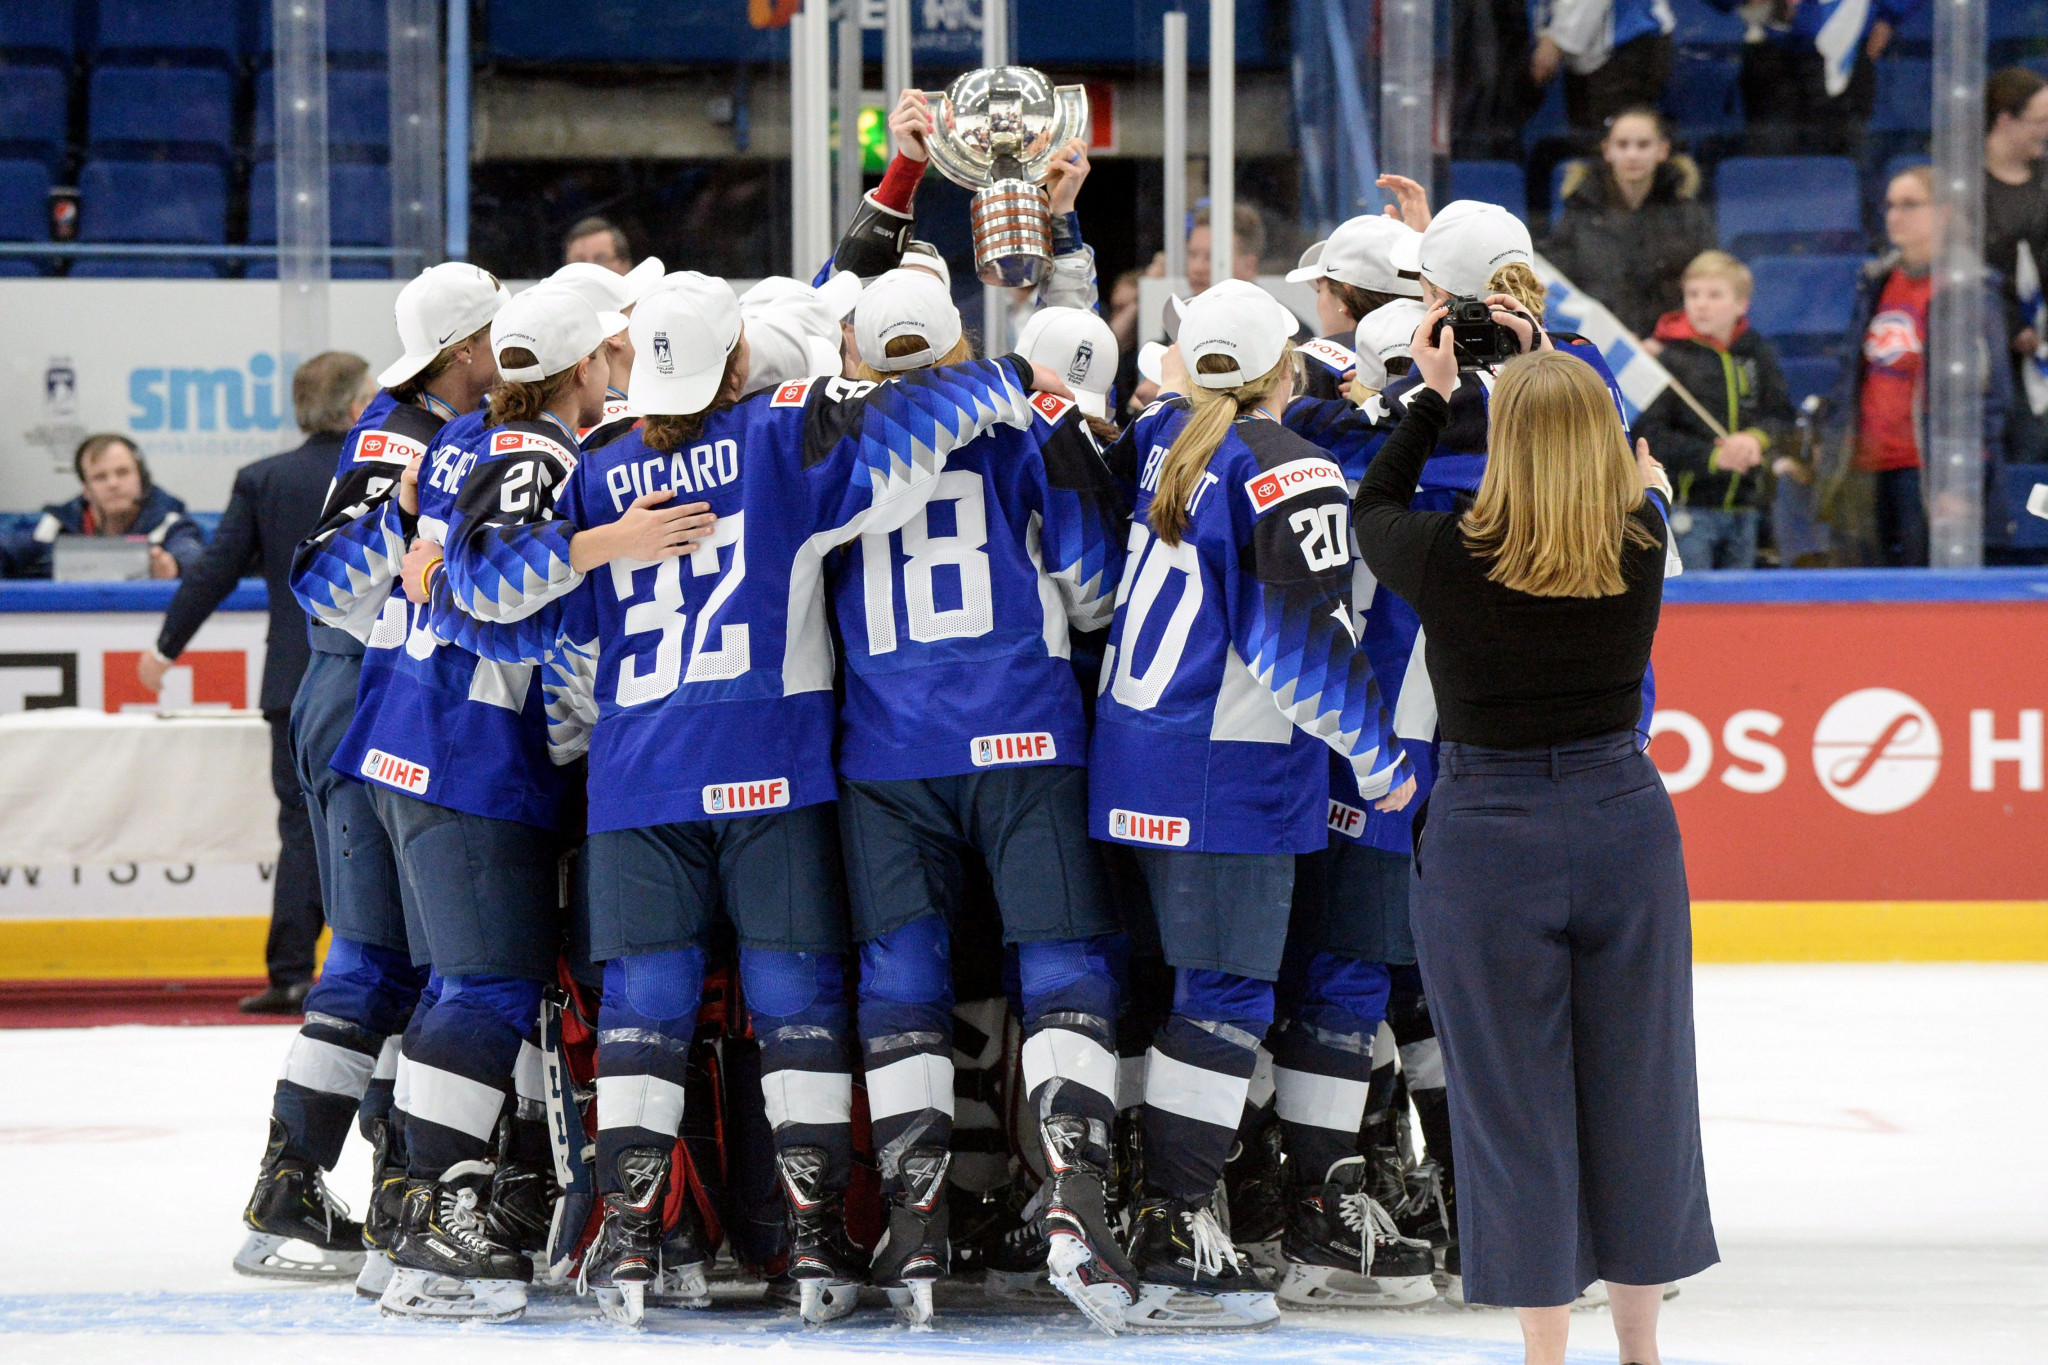 The game schedule has been released for the 2021 IIHF Women's World Championship in Canada, where the United States will aim to defend the title they won two years ago ©Getty Images